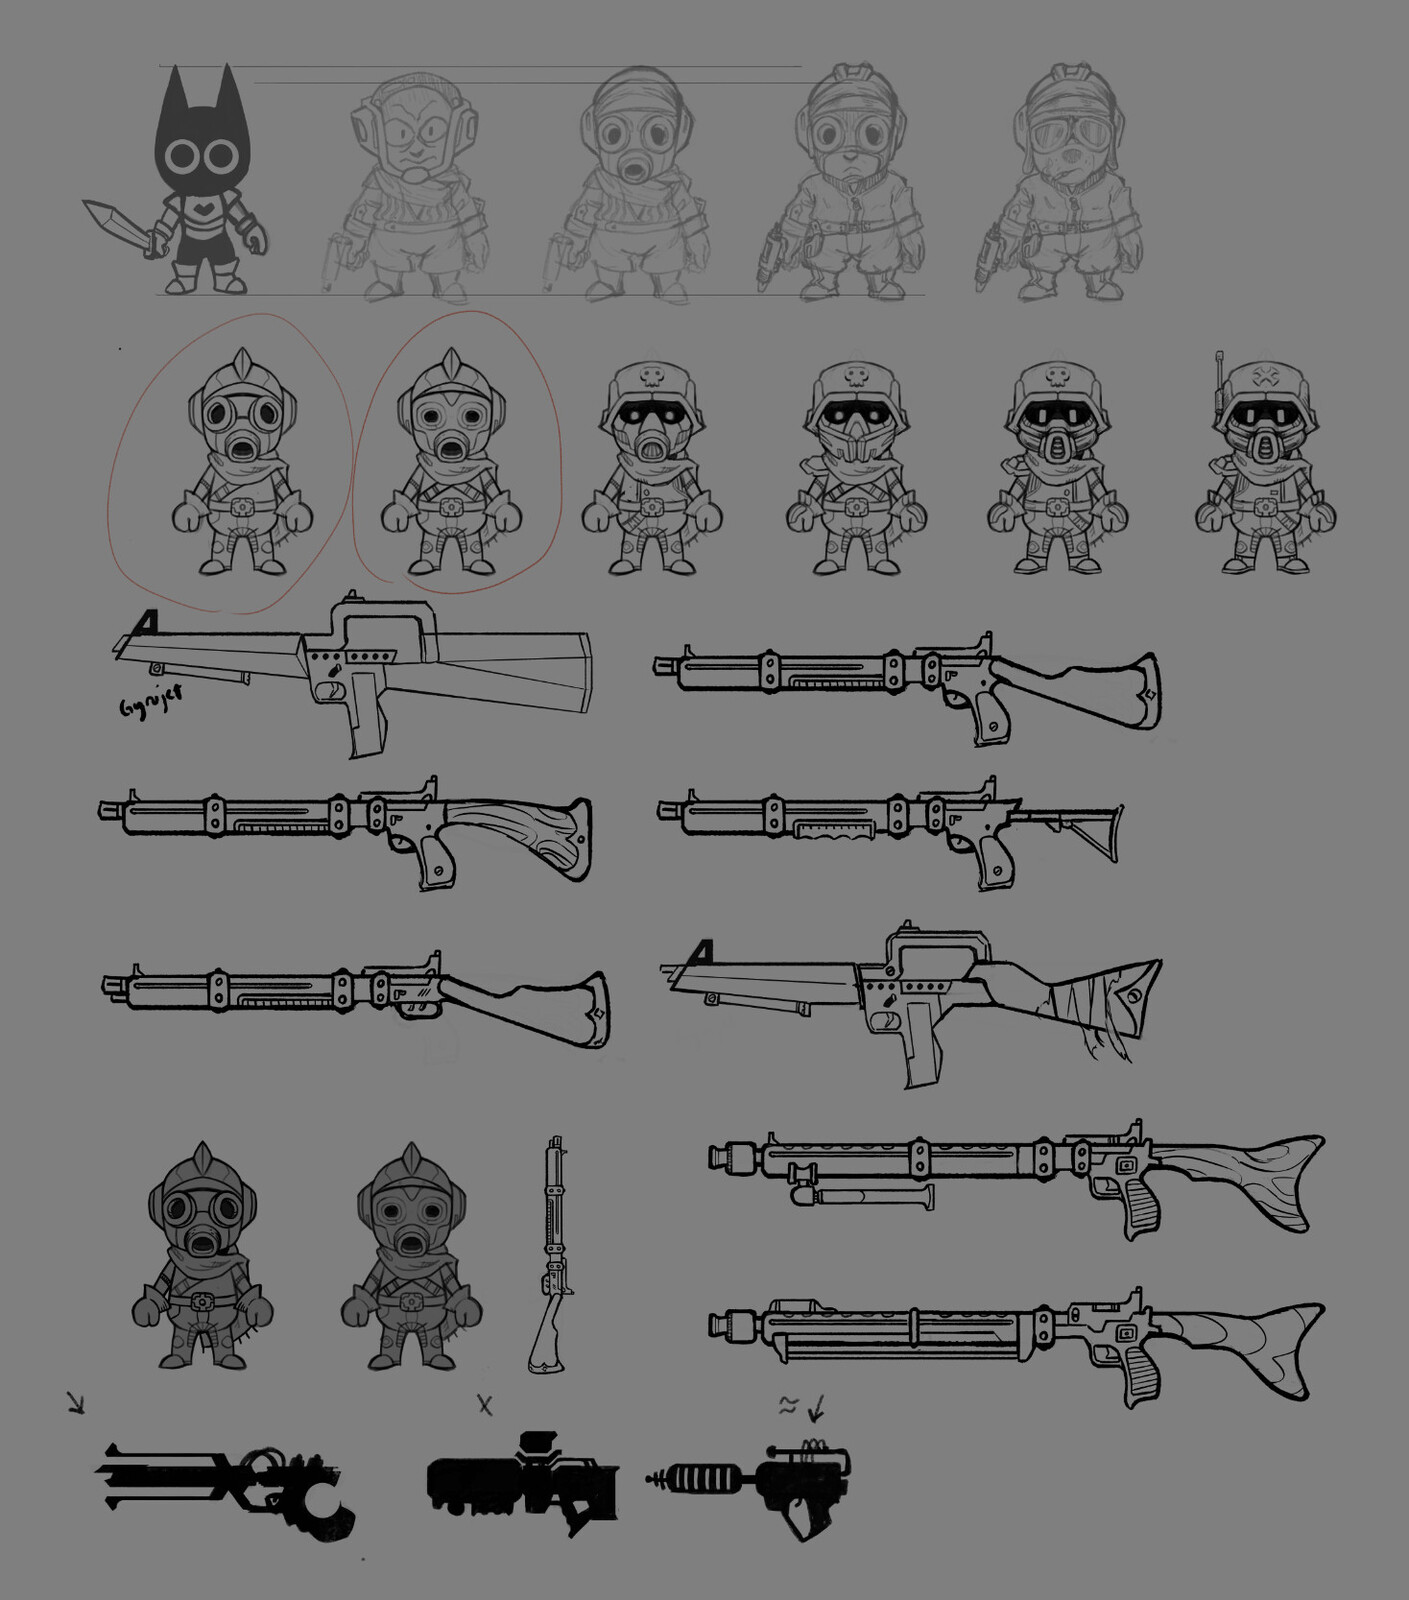 Some character and weapon exploration.